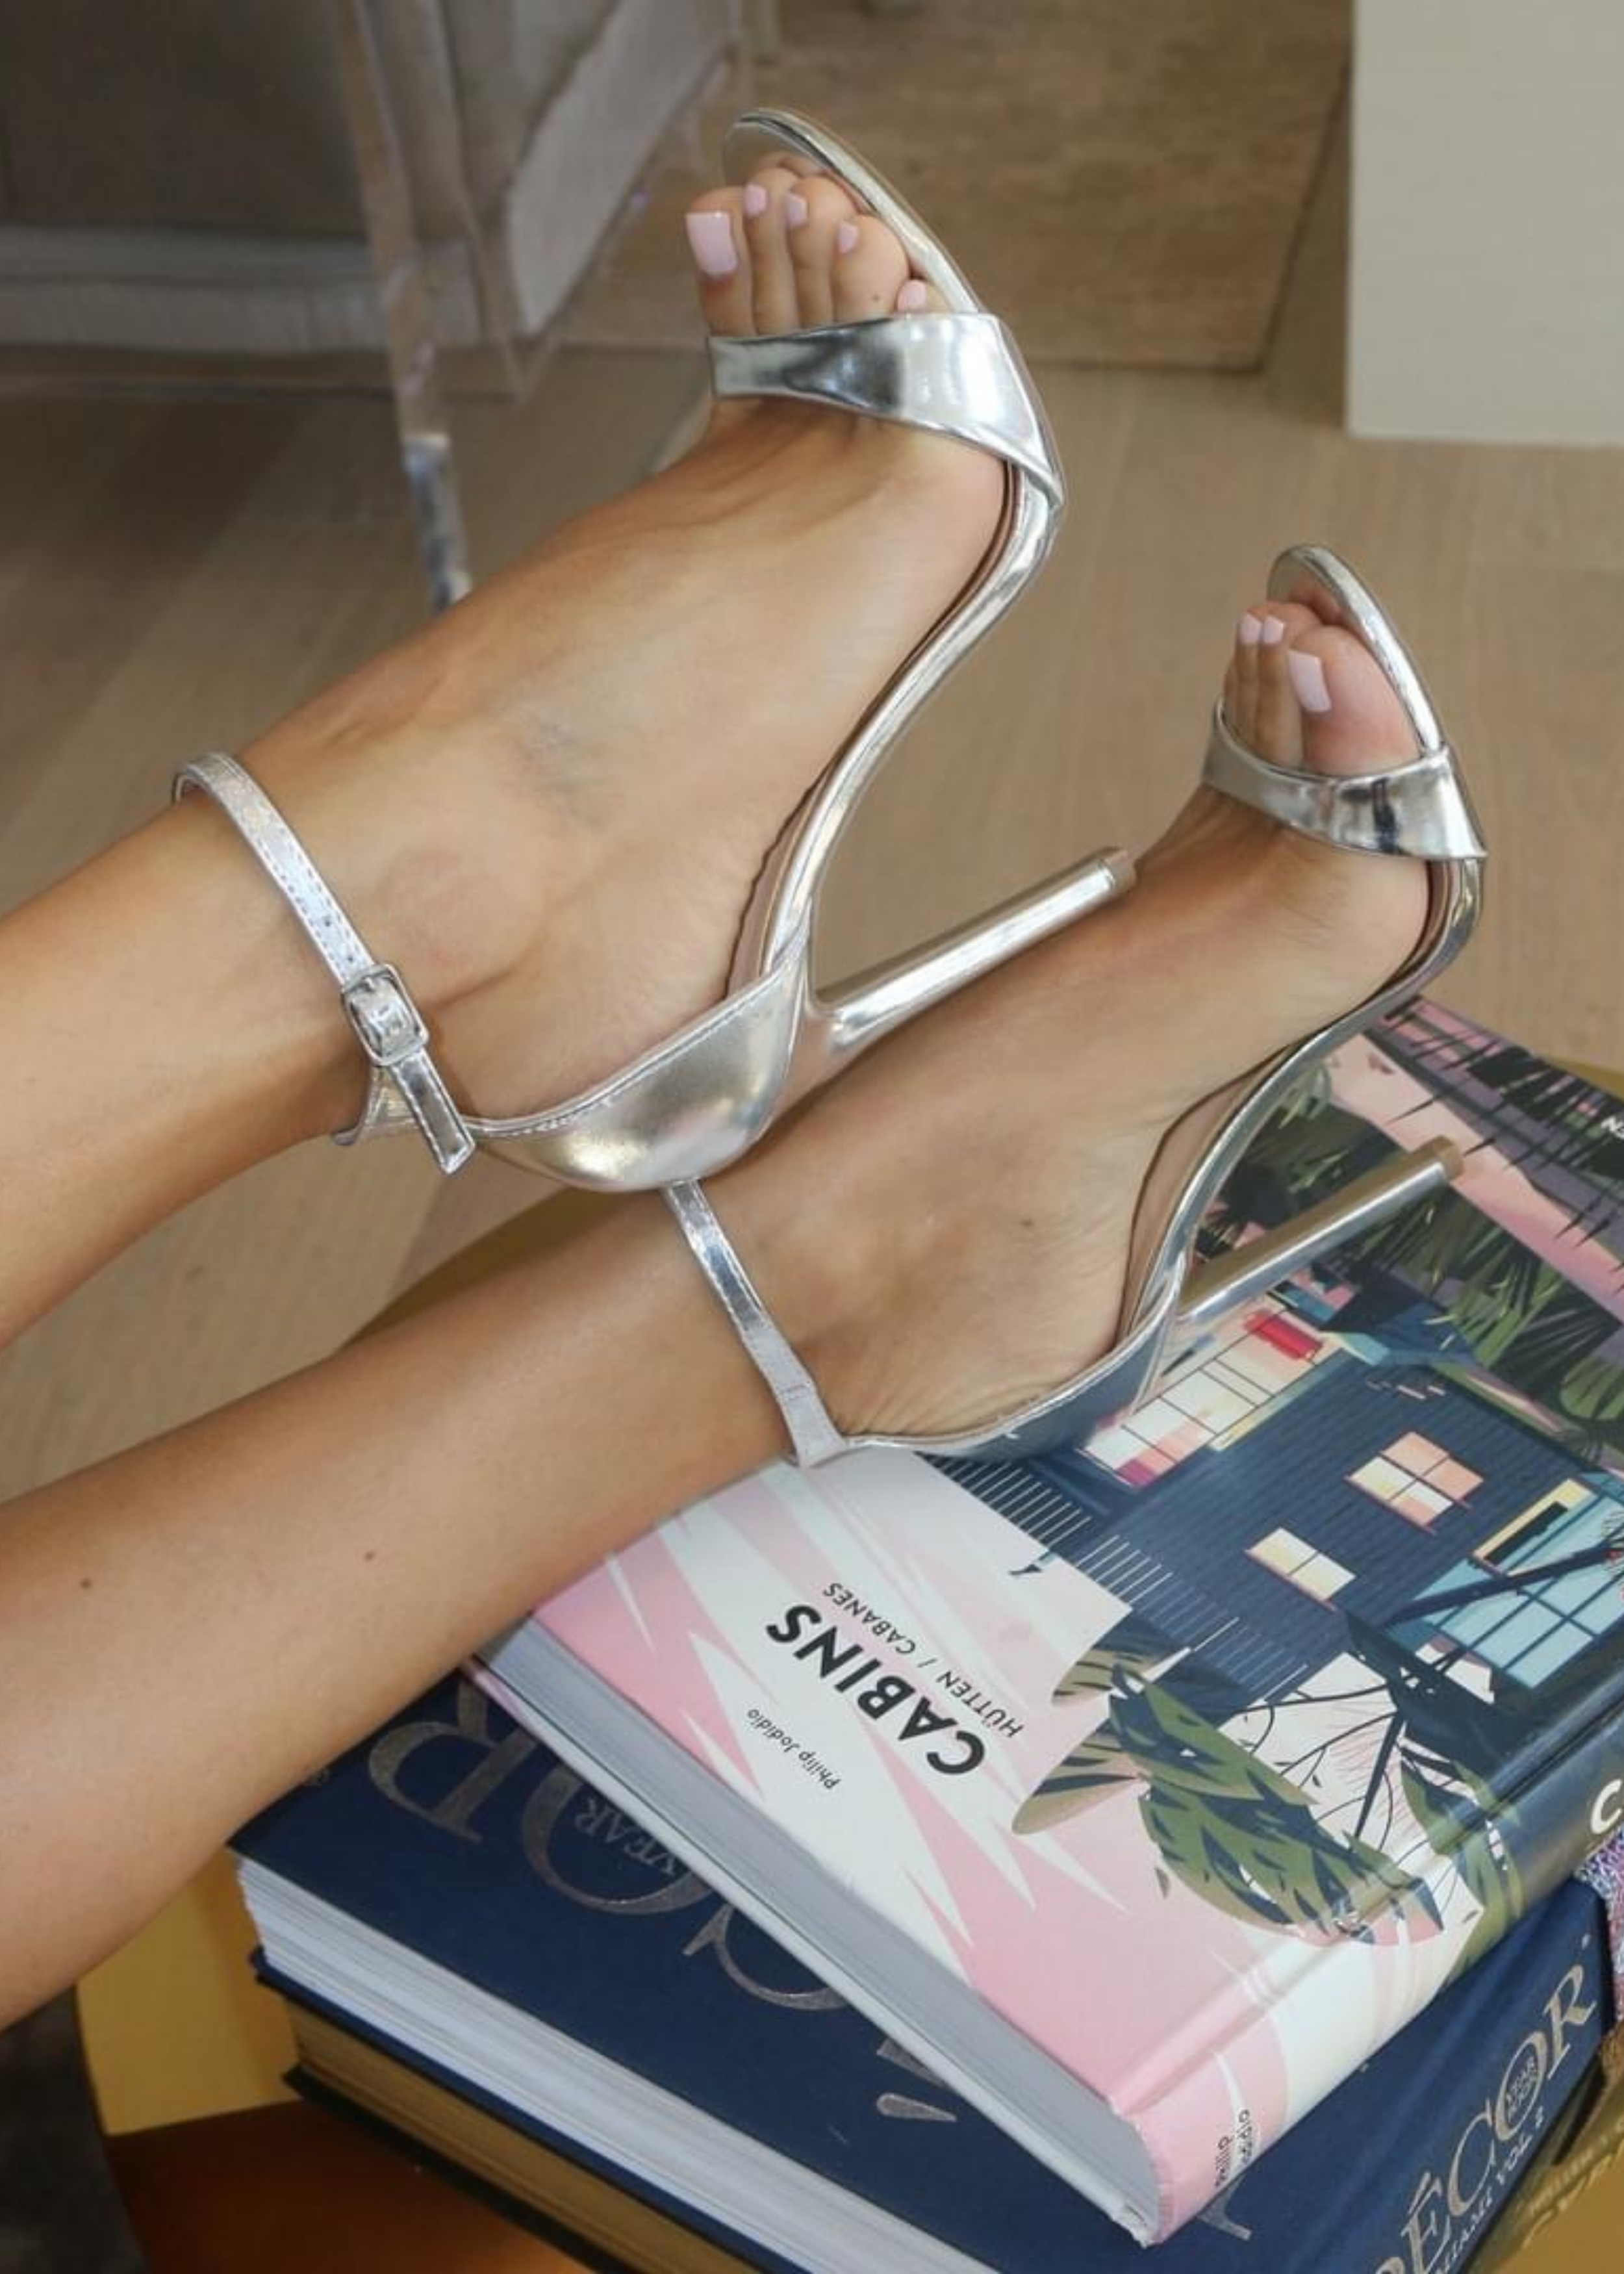 Gloria Lace-up Sandal In Silver Metallic Leather and Vinyl with Acrylic Heel  | Larroude Shoes